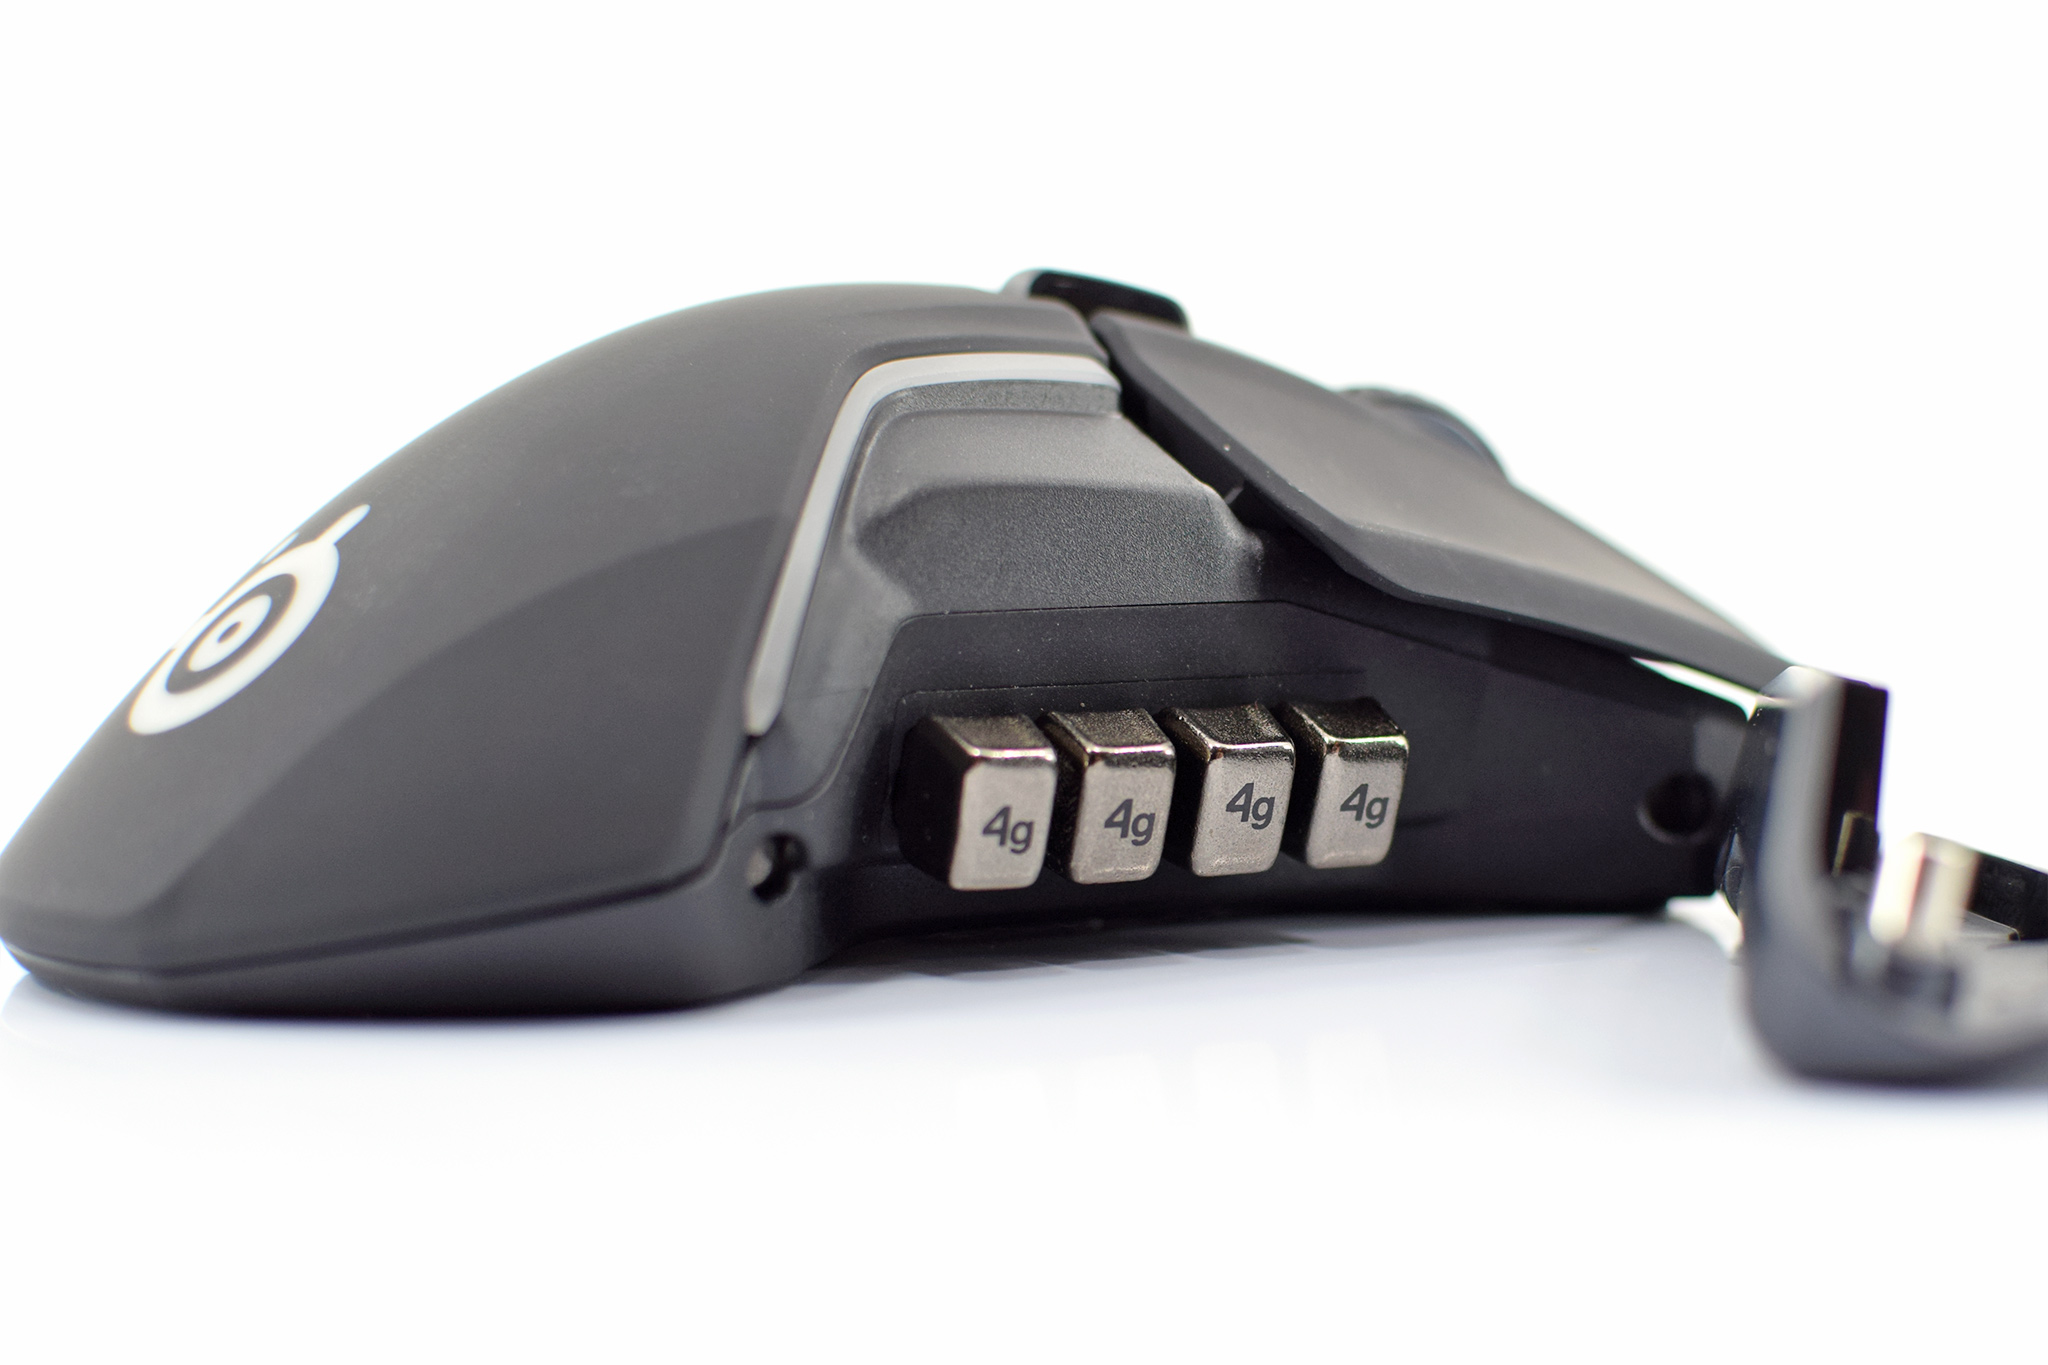 KitGuru 600 Review | SteelSeries Mouse Rival